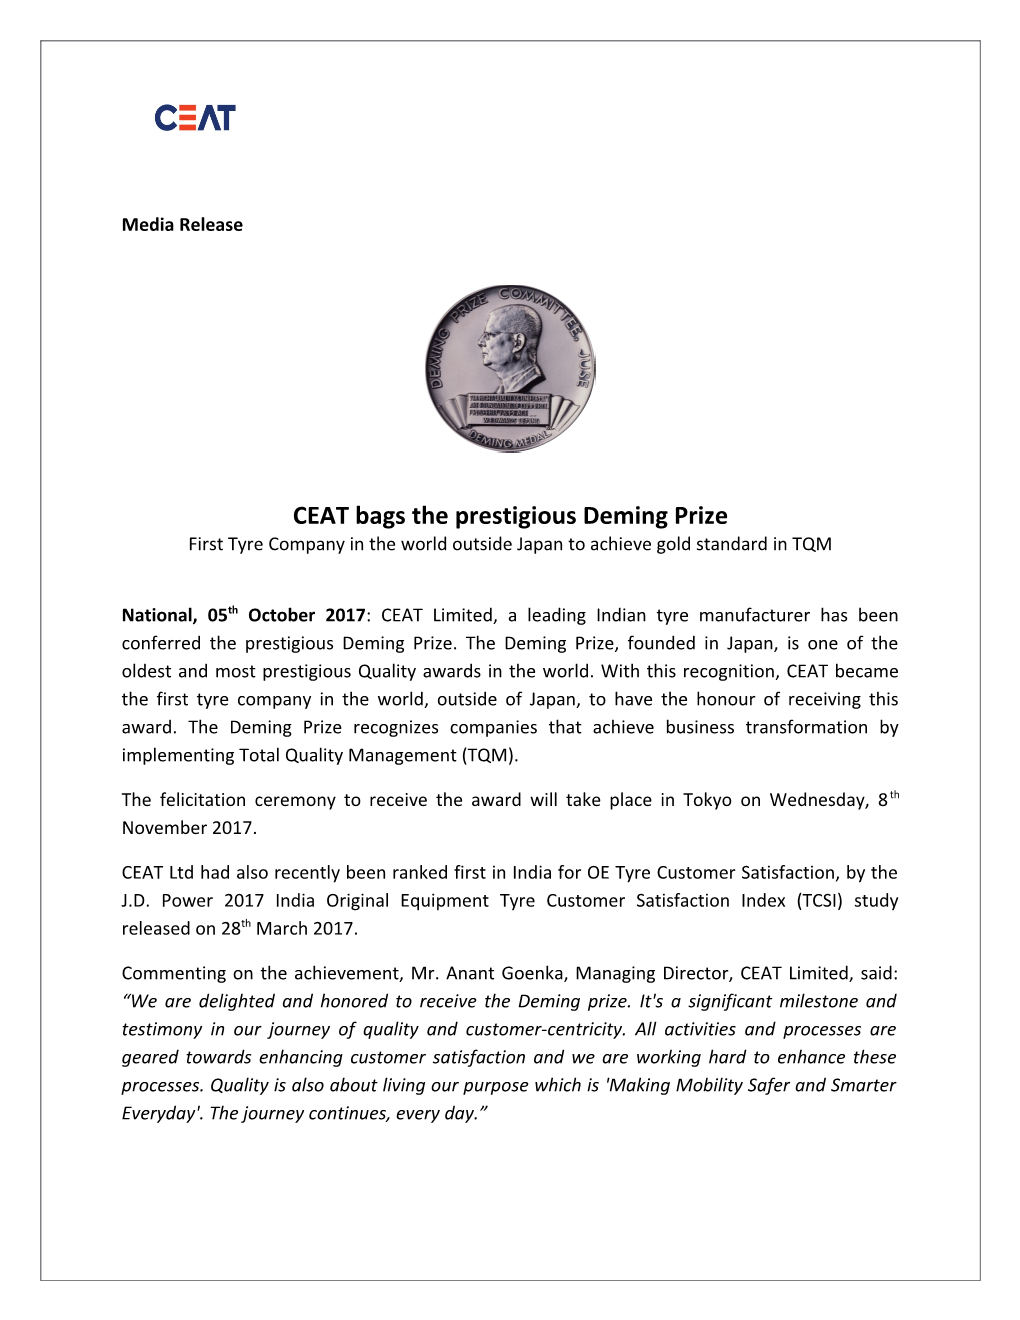 CEAT Bags the Prestigious Deming Prize